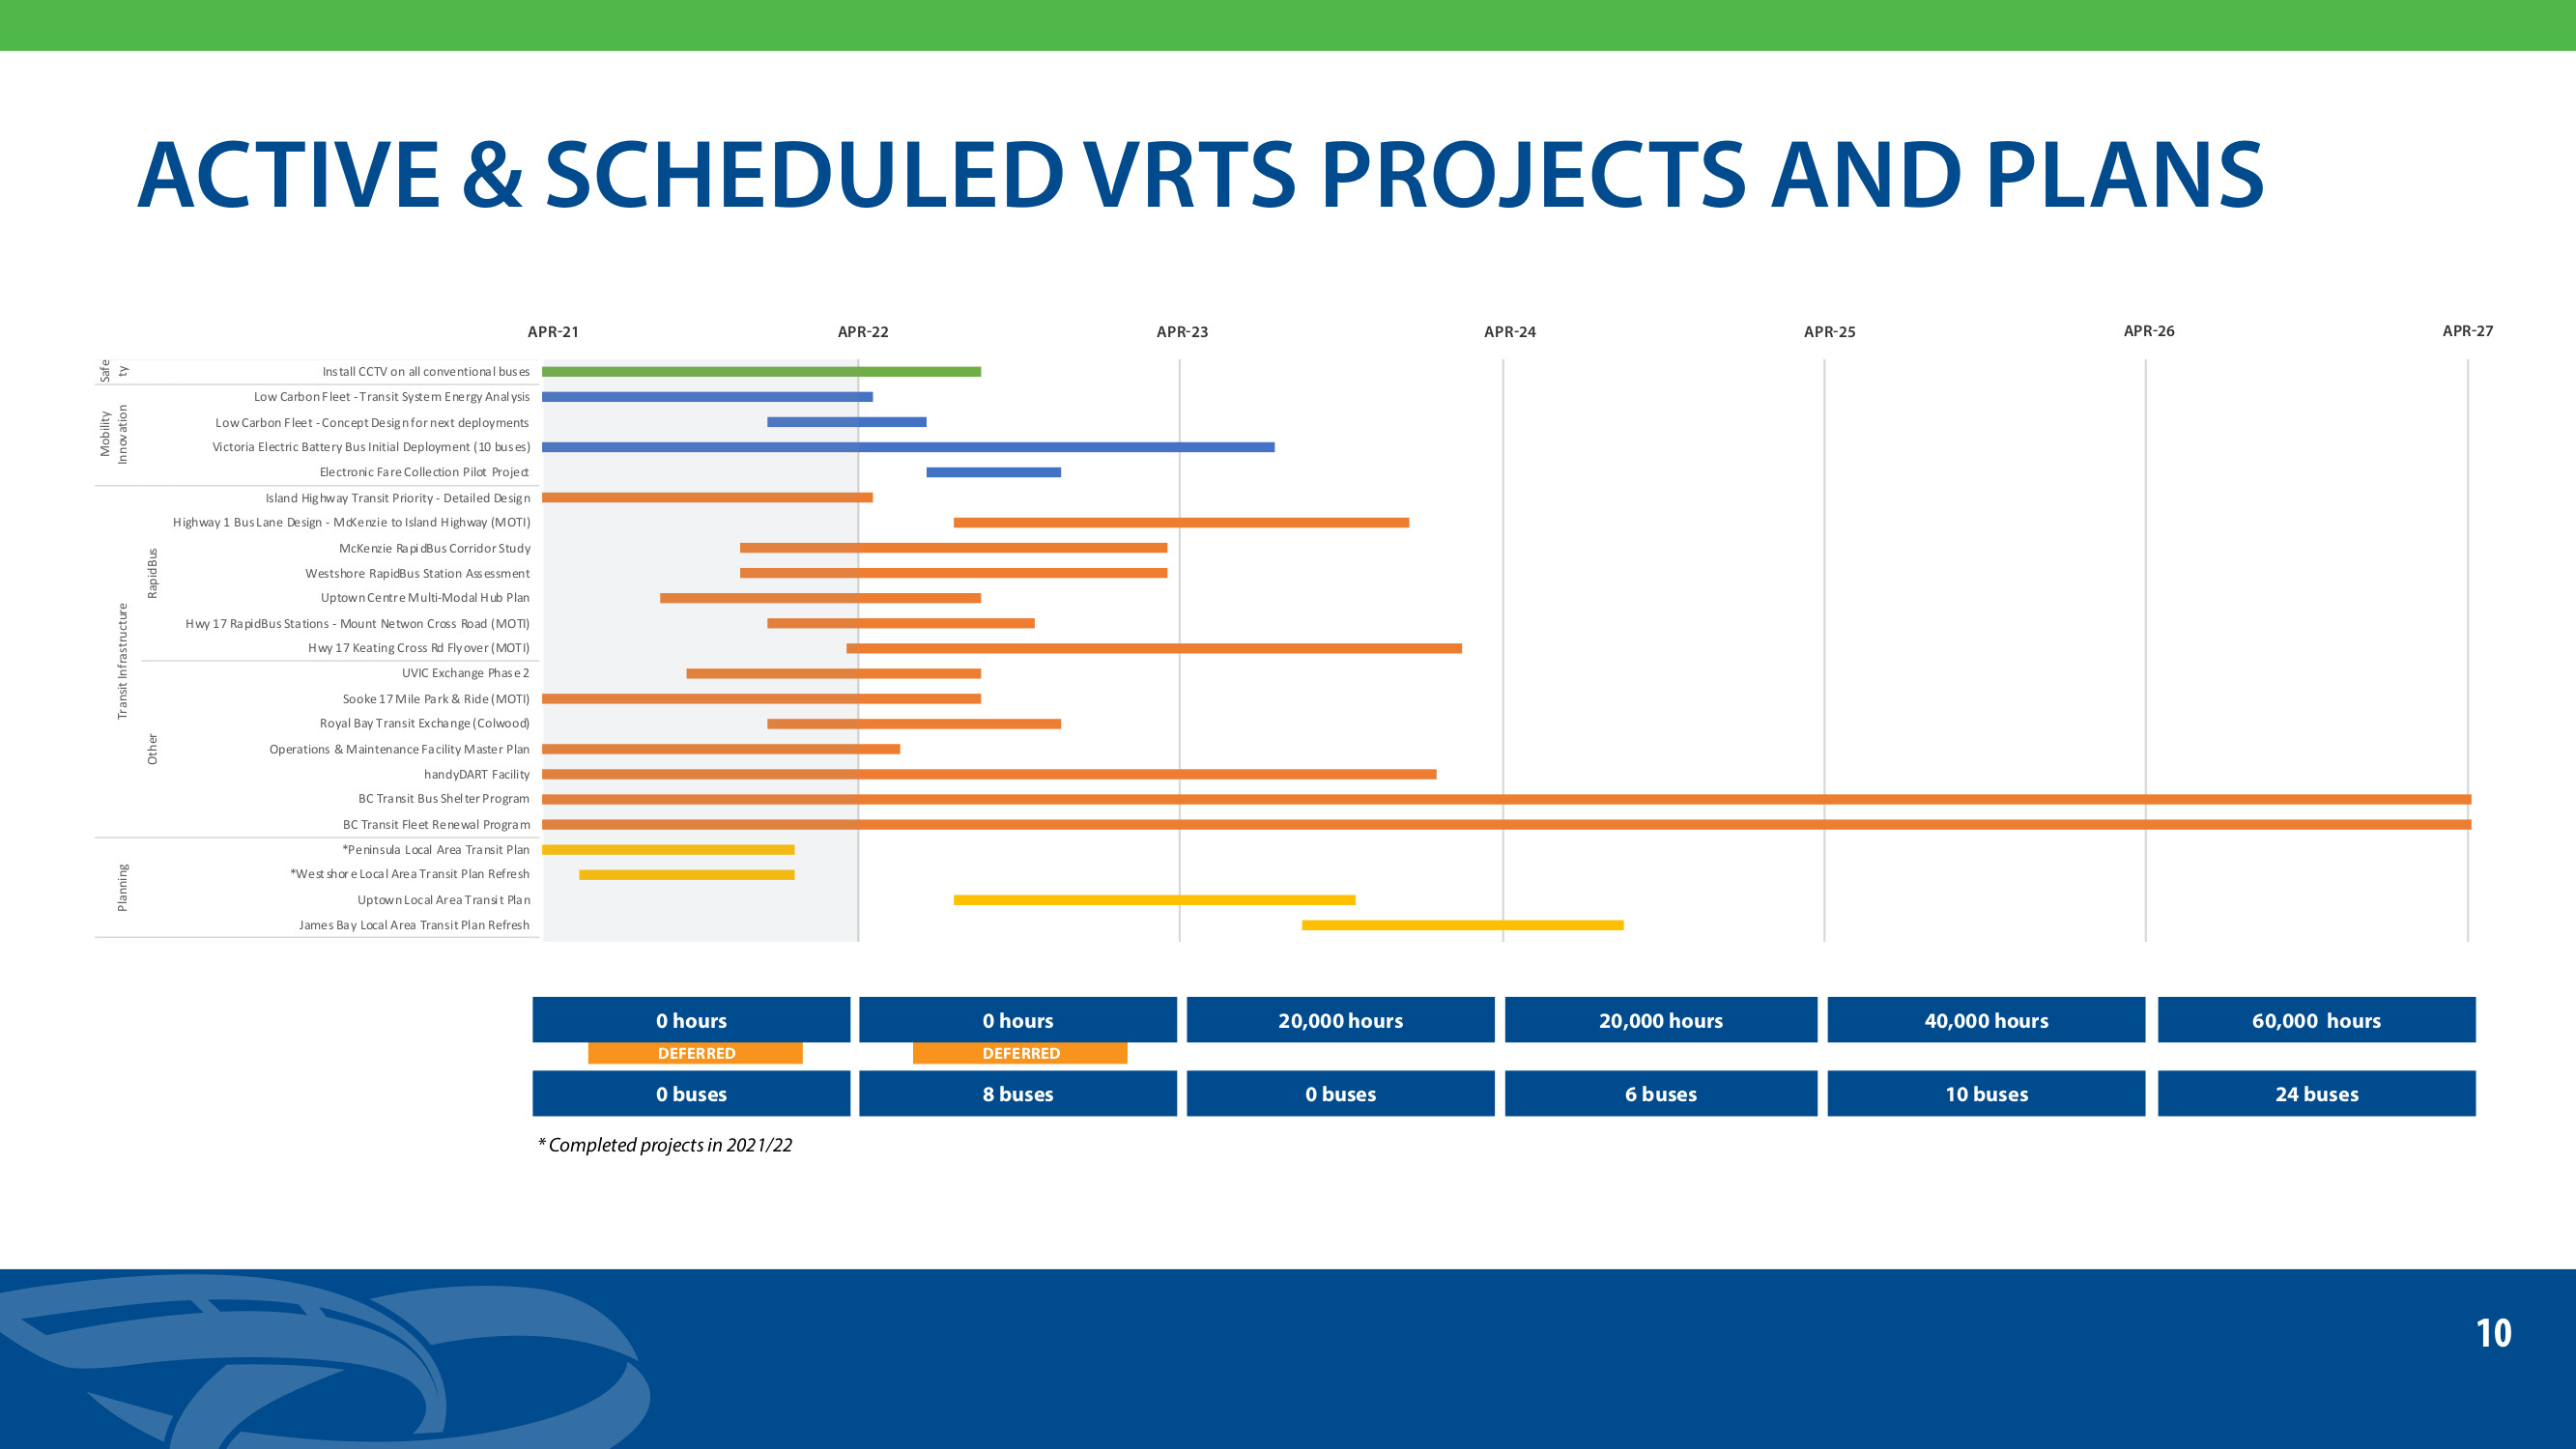 VRTS 10 Year Vision Projects and Plans 2022